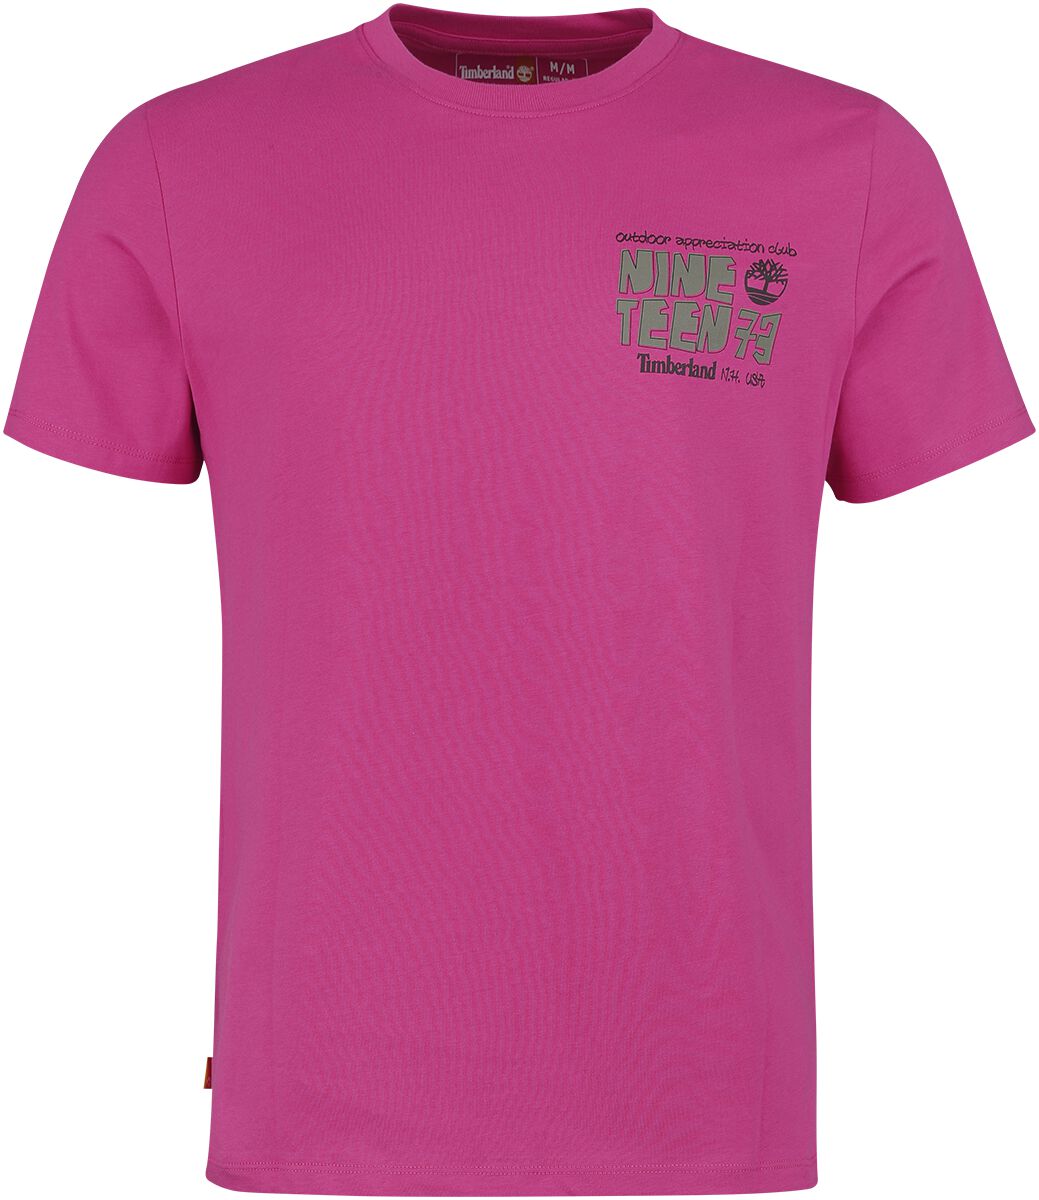 Image of T-Shirt di Timberland - Outdoor back graphic t-shirt - S a M - Uomo - rosa